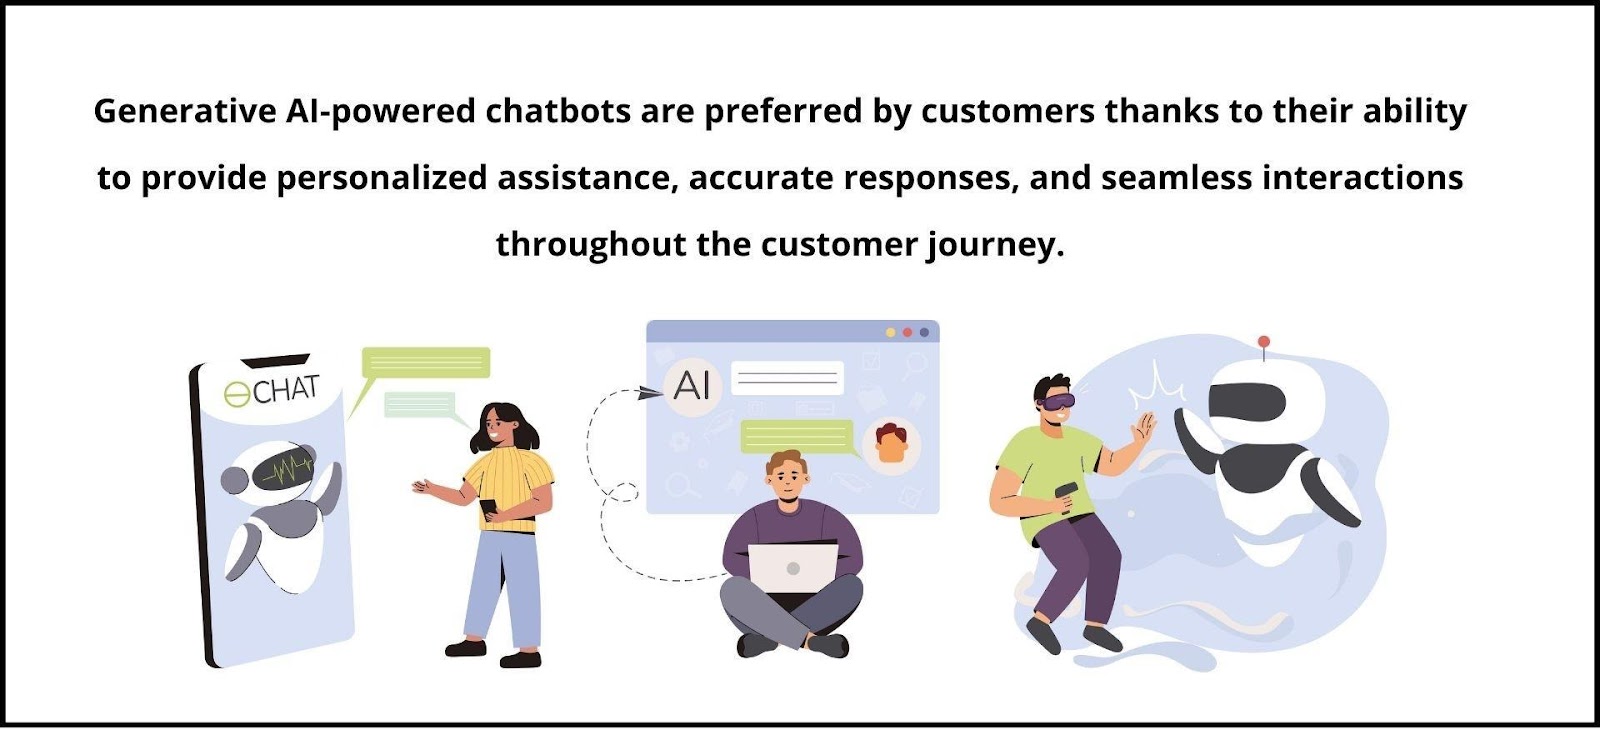 Customers prefer generative AI-powered chatbots because they can provide personalized assistance, accurate responses, and seamless interactions throughout the customer journey.